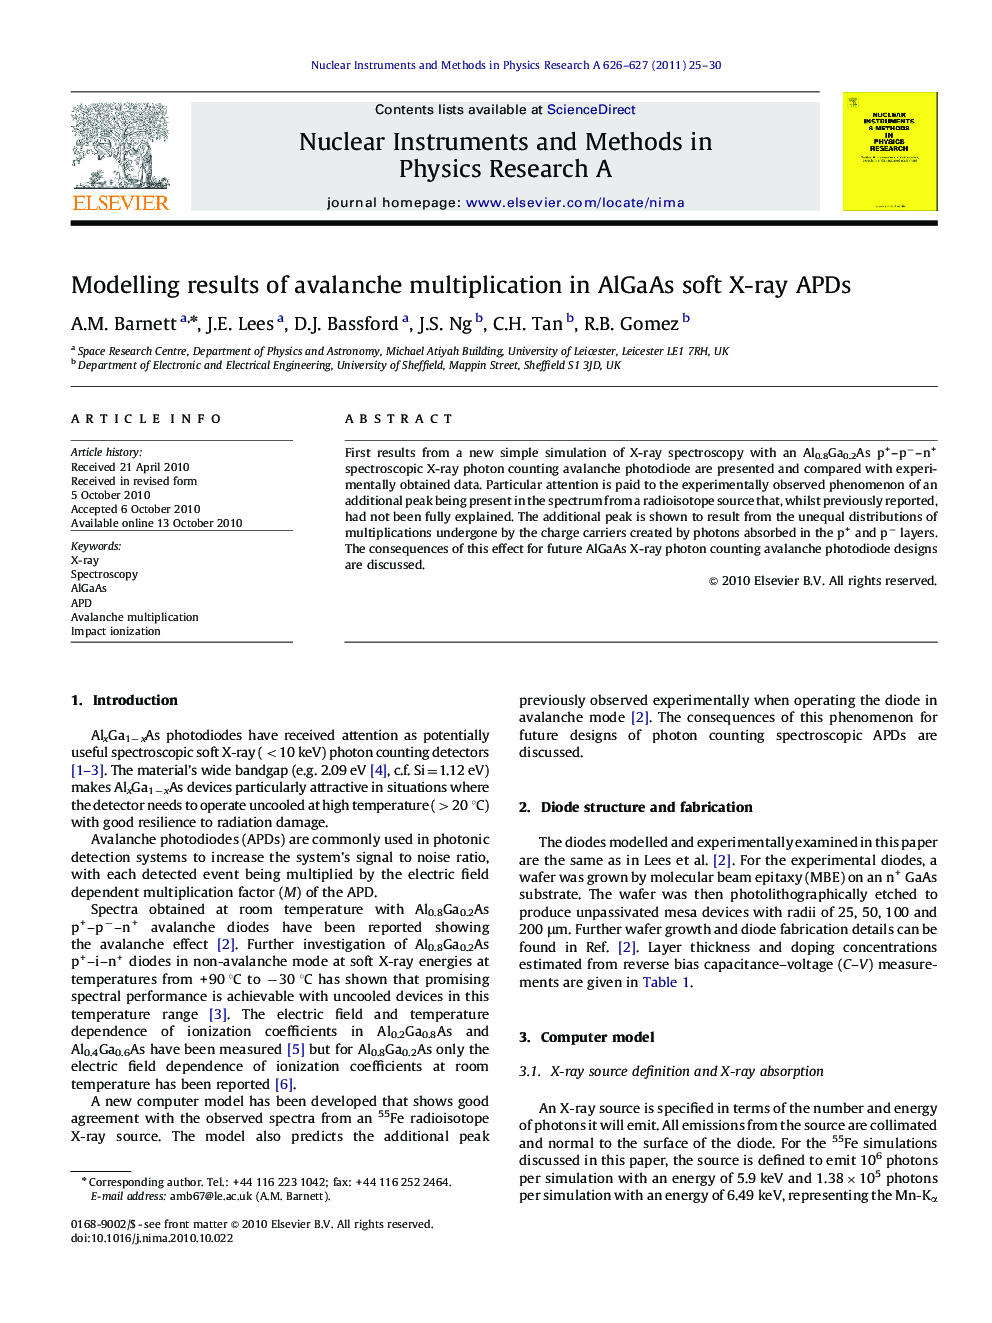 Modelling results of avalanche multiplication in AlGaAs soft X-ray APDs